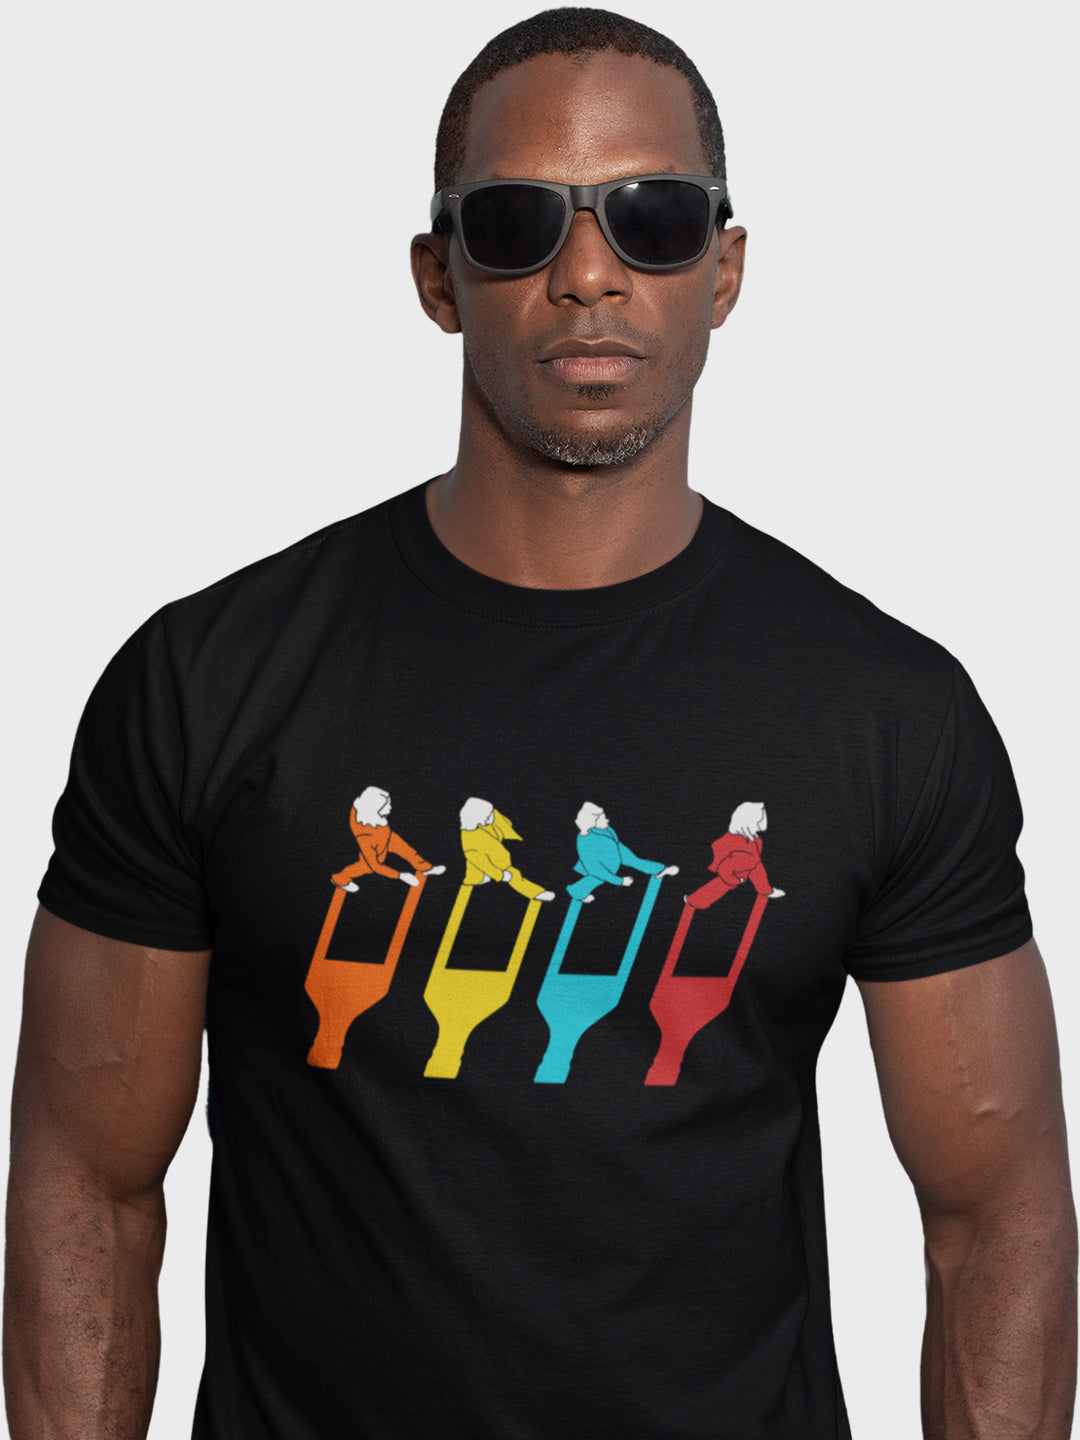 The Bar Down the Abby Road T-Shirt